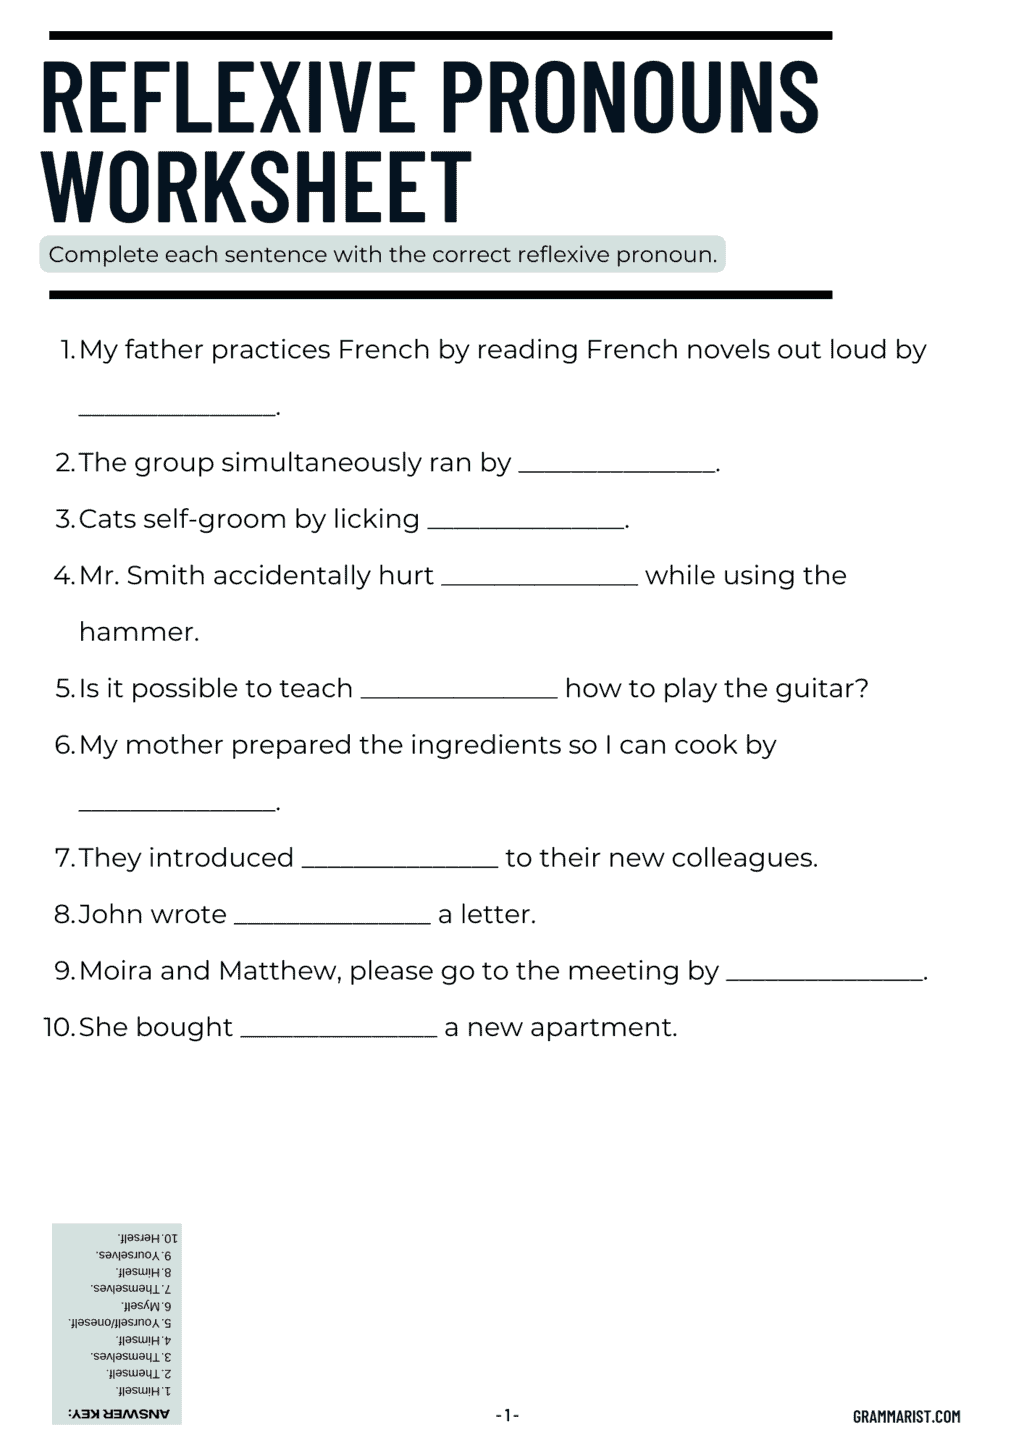 Reflexive Pronouns - Definition & Examples (Worksheet Included)